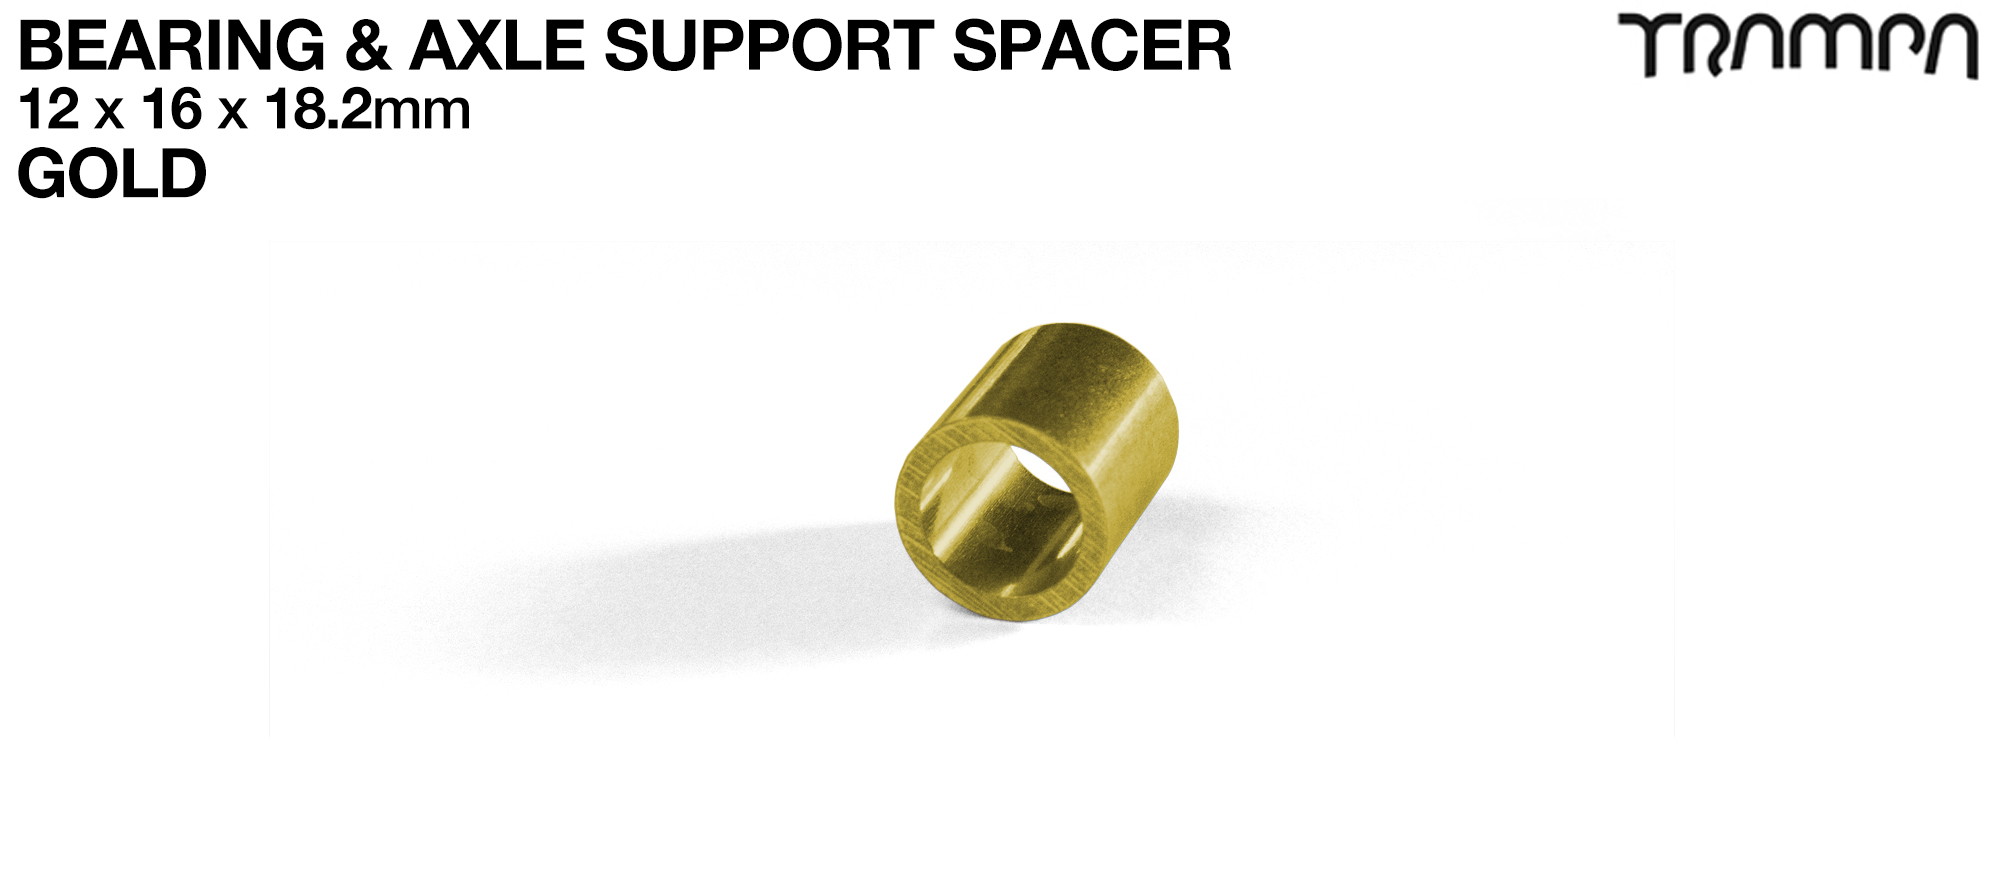 18.2mm Wheel Support Axle Spacers - GOLD x4